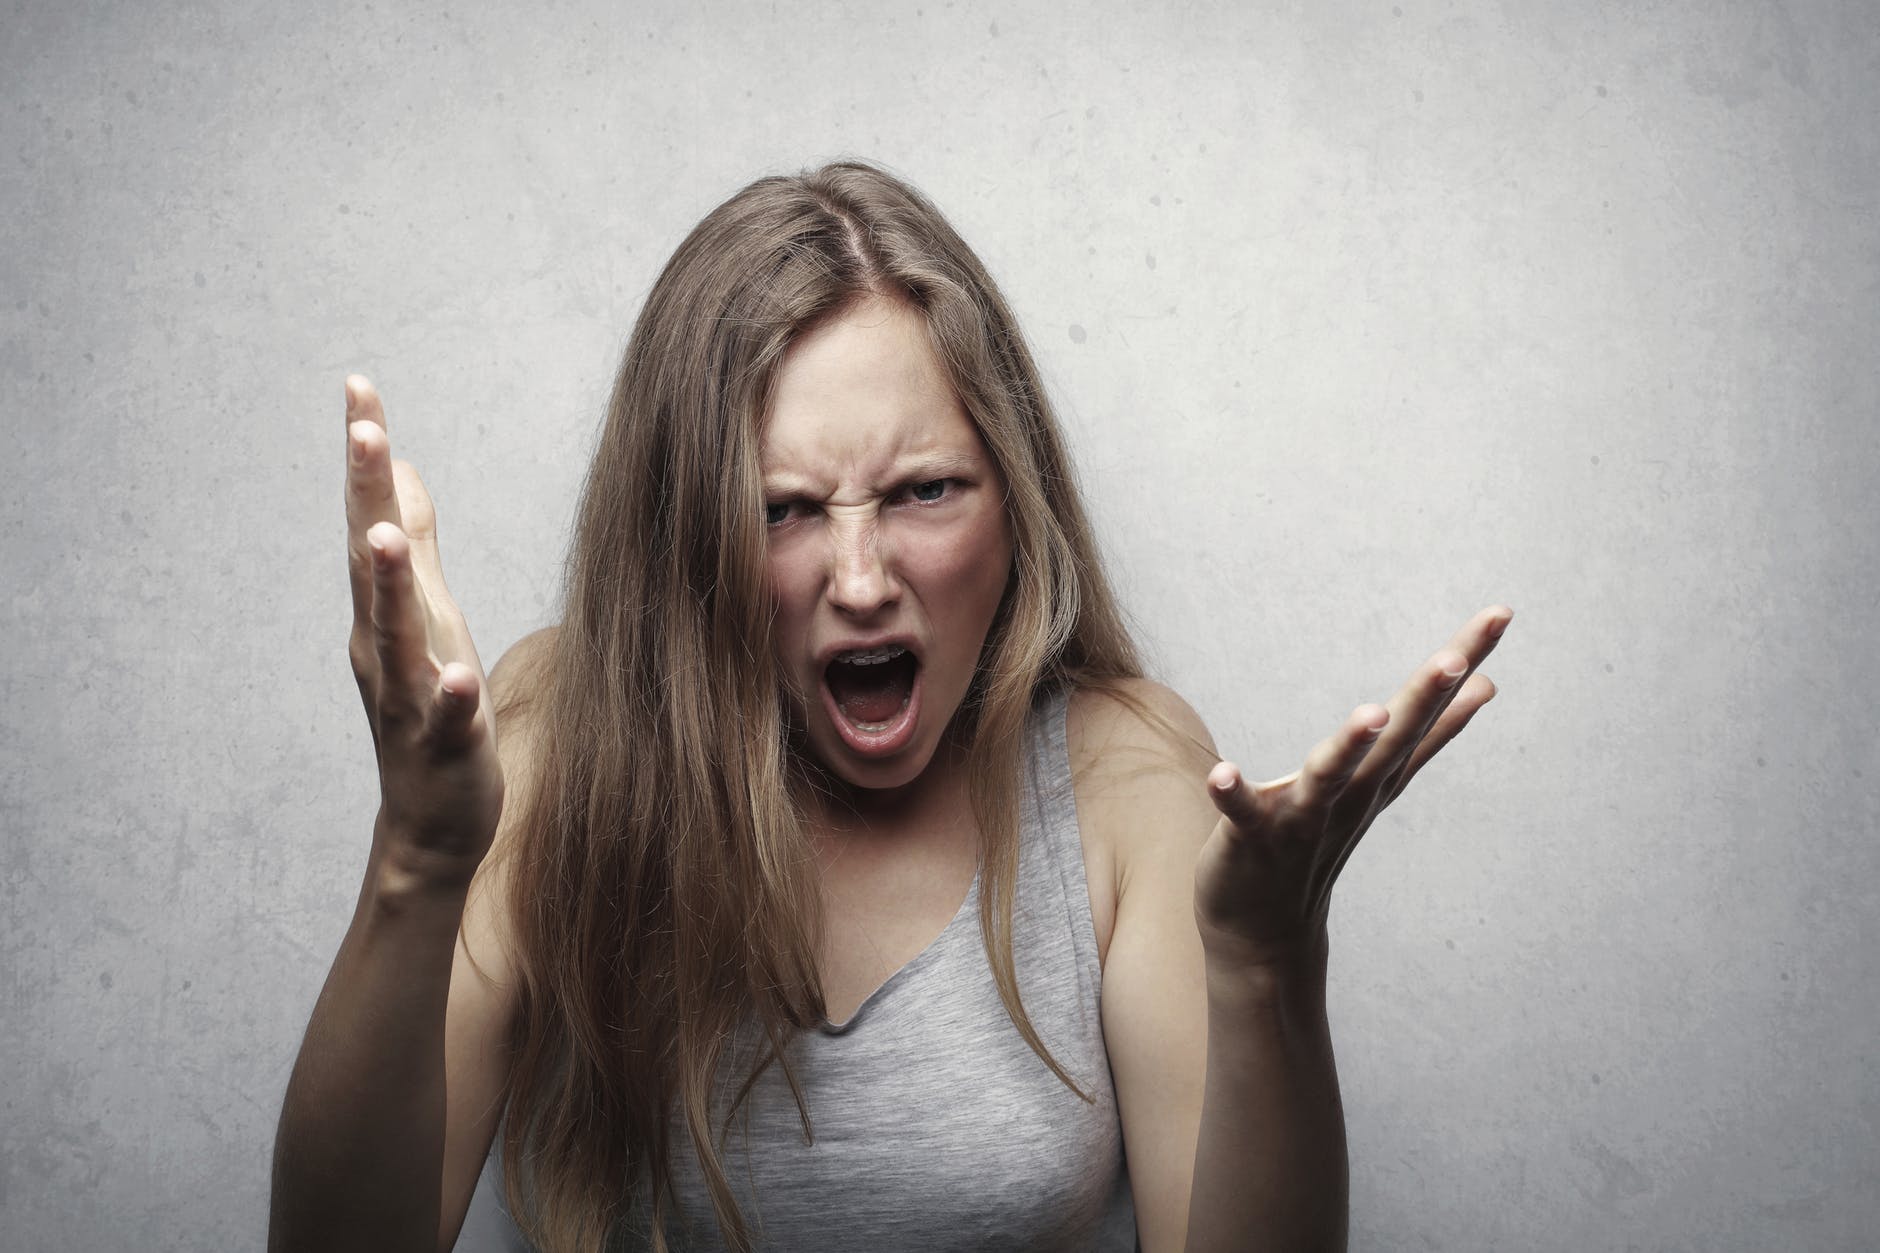 An angry young woman screaming. | Photo: Pexels.